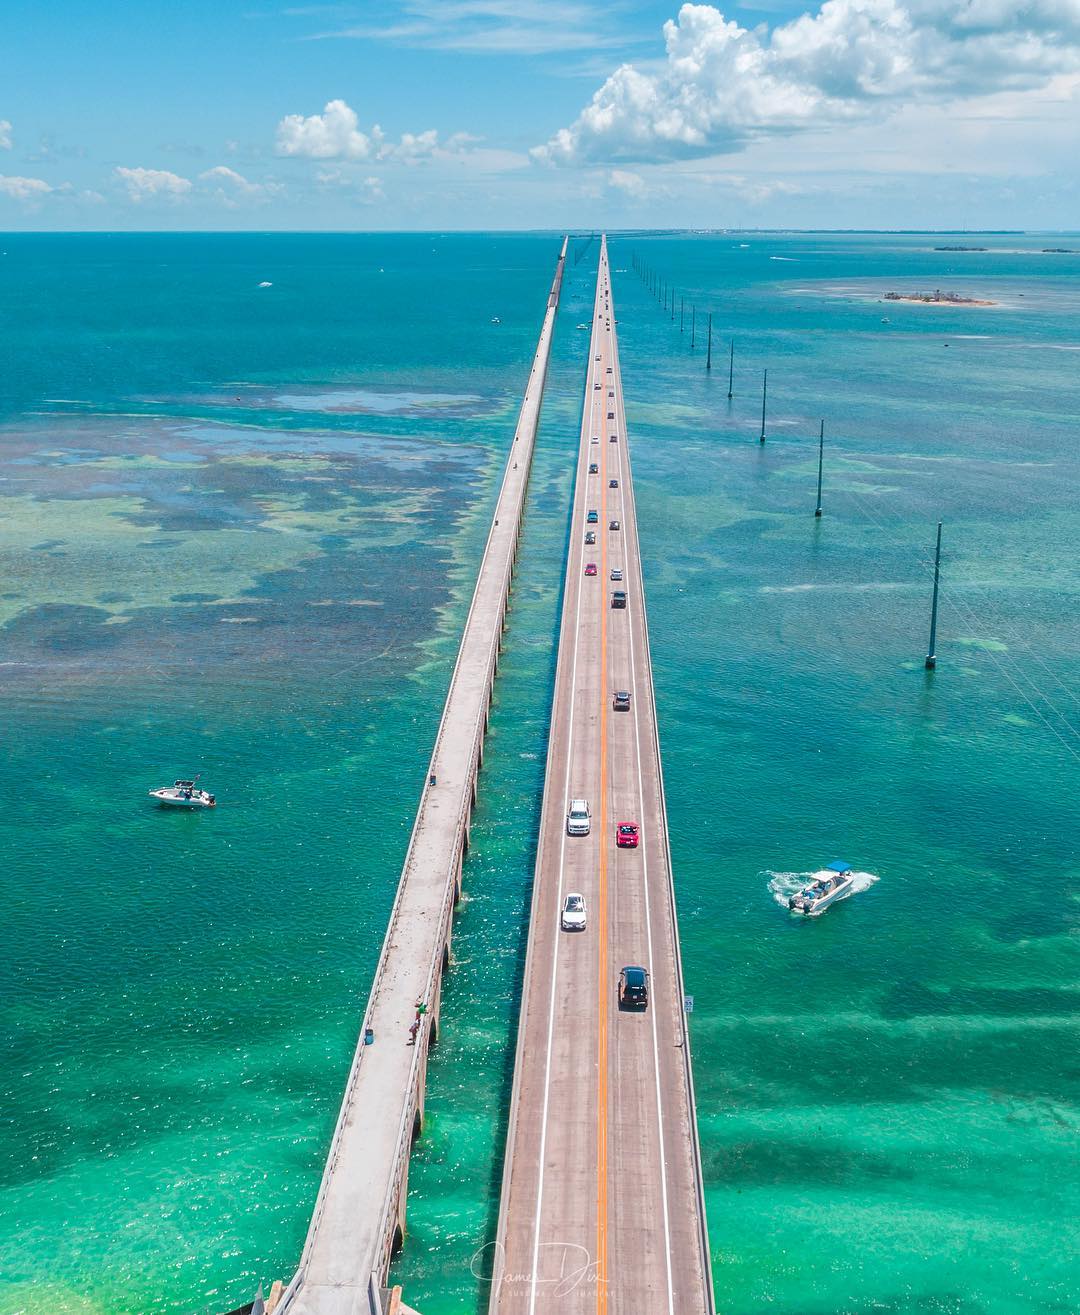 Highway hovering over ocean. Photo by Instagram user @sublime.imagery